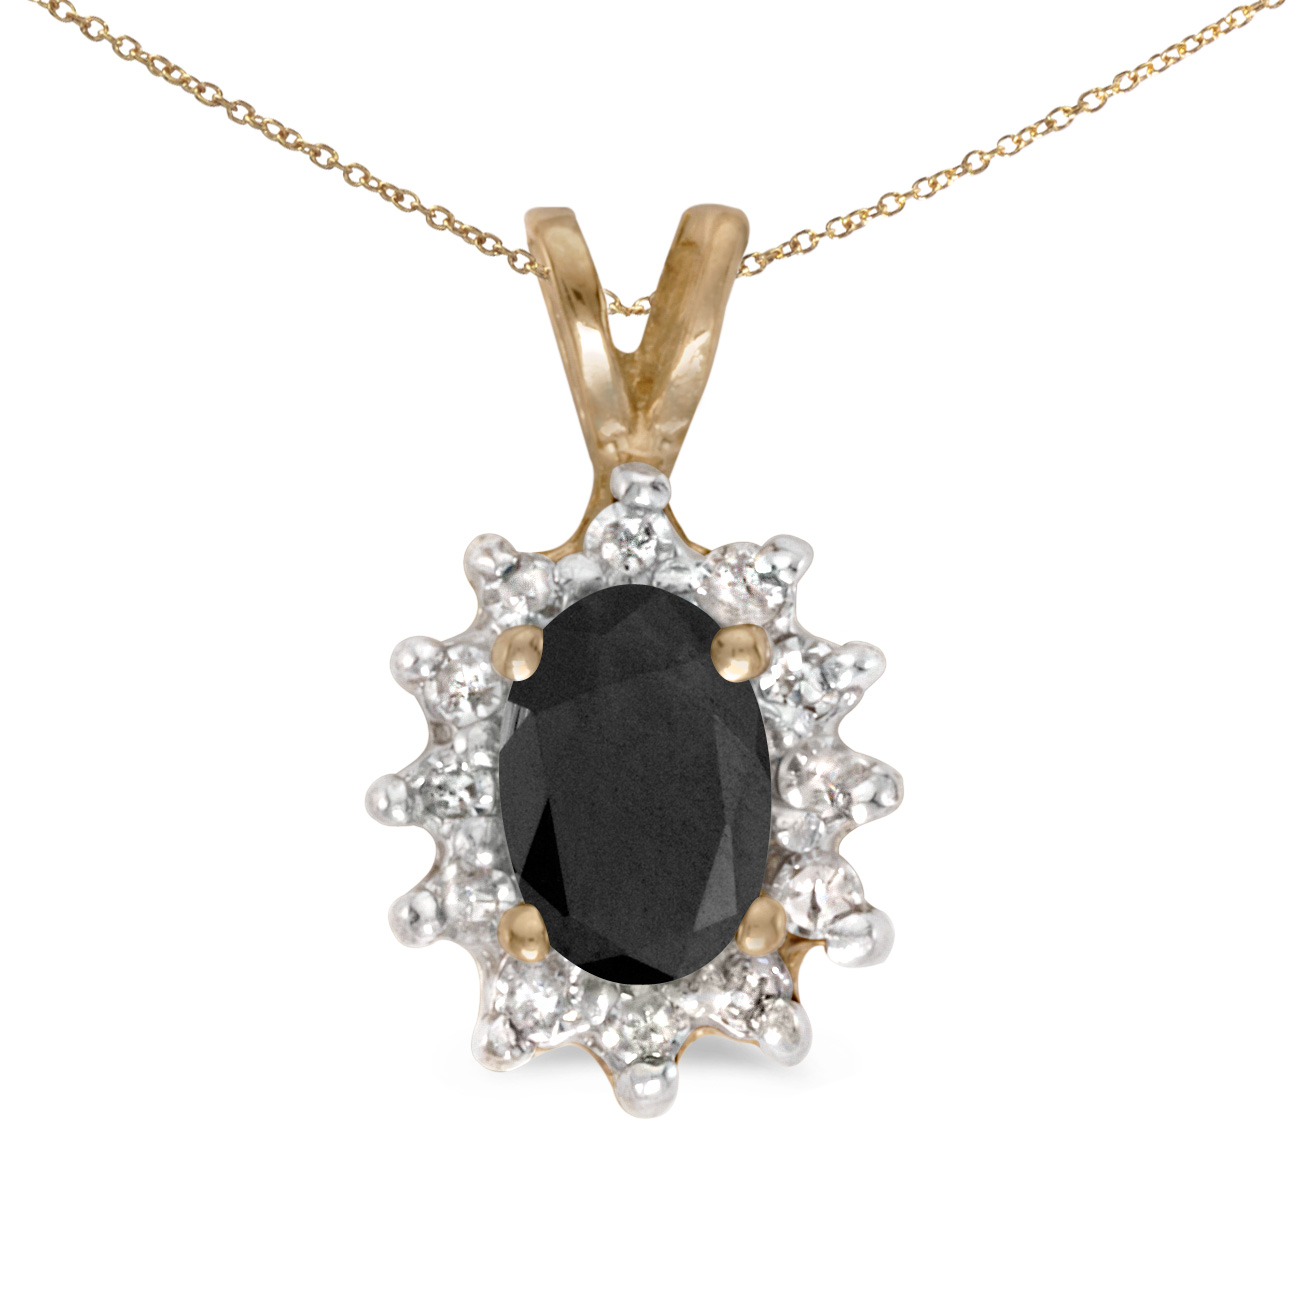 This 14k yellow gold oval onyx and diamond pendant features a 6x4 mm genuine natural onyx with a ...